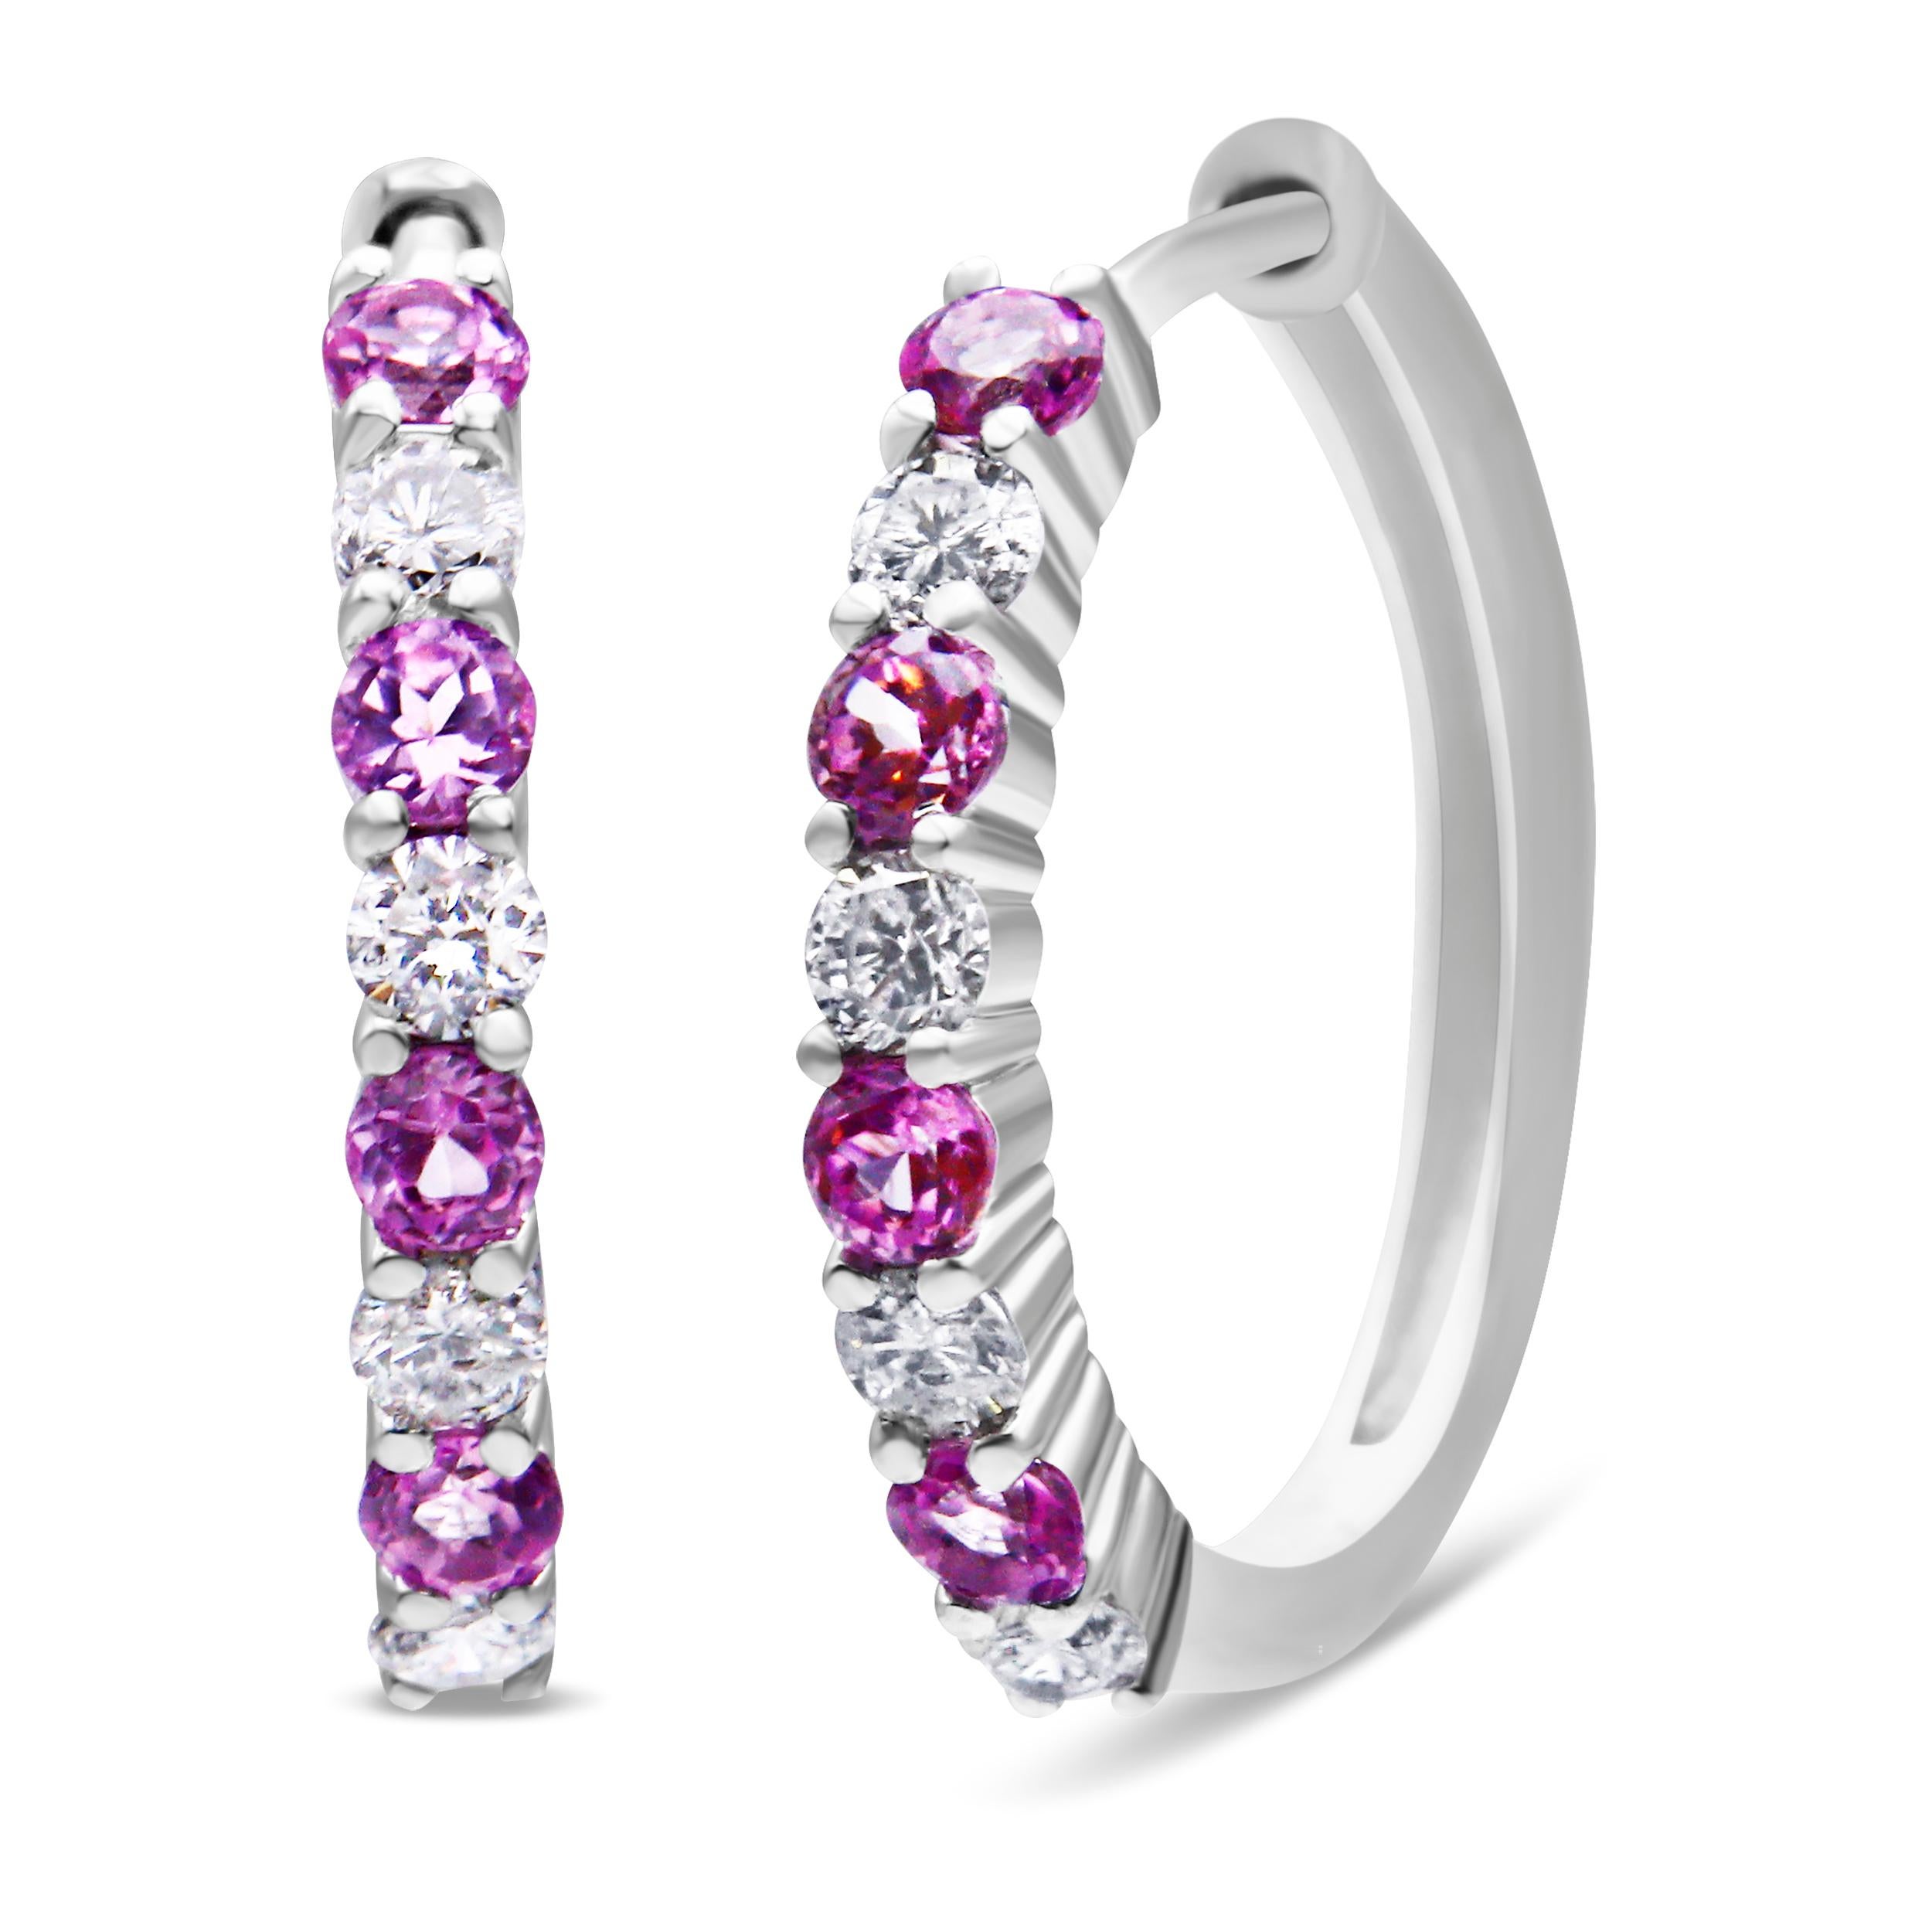 Crafted in polished 10k white gold, these gorgeous hoop earrings features an alternating design of 2.5MM pink sapphire gemstones and 1/2ct TDW of round cut diamonds that line the front half of this earring. This is the perfect accessory to add